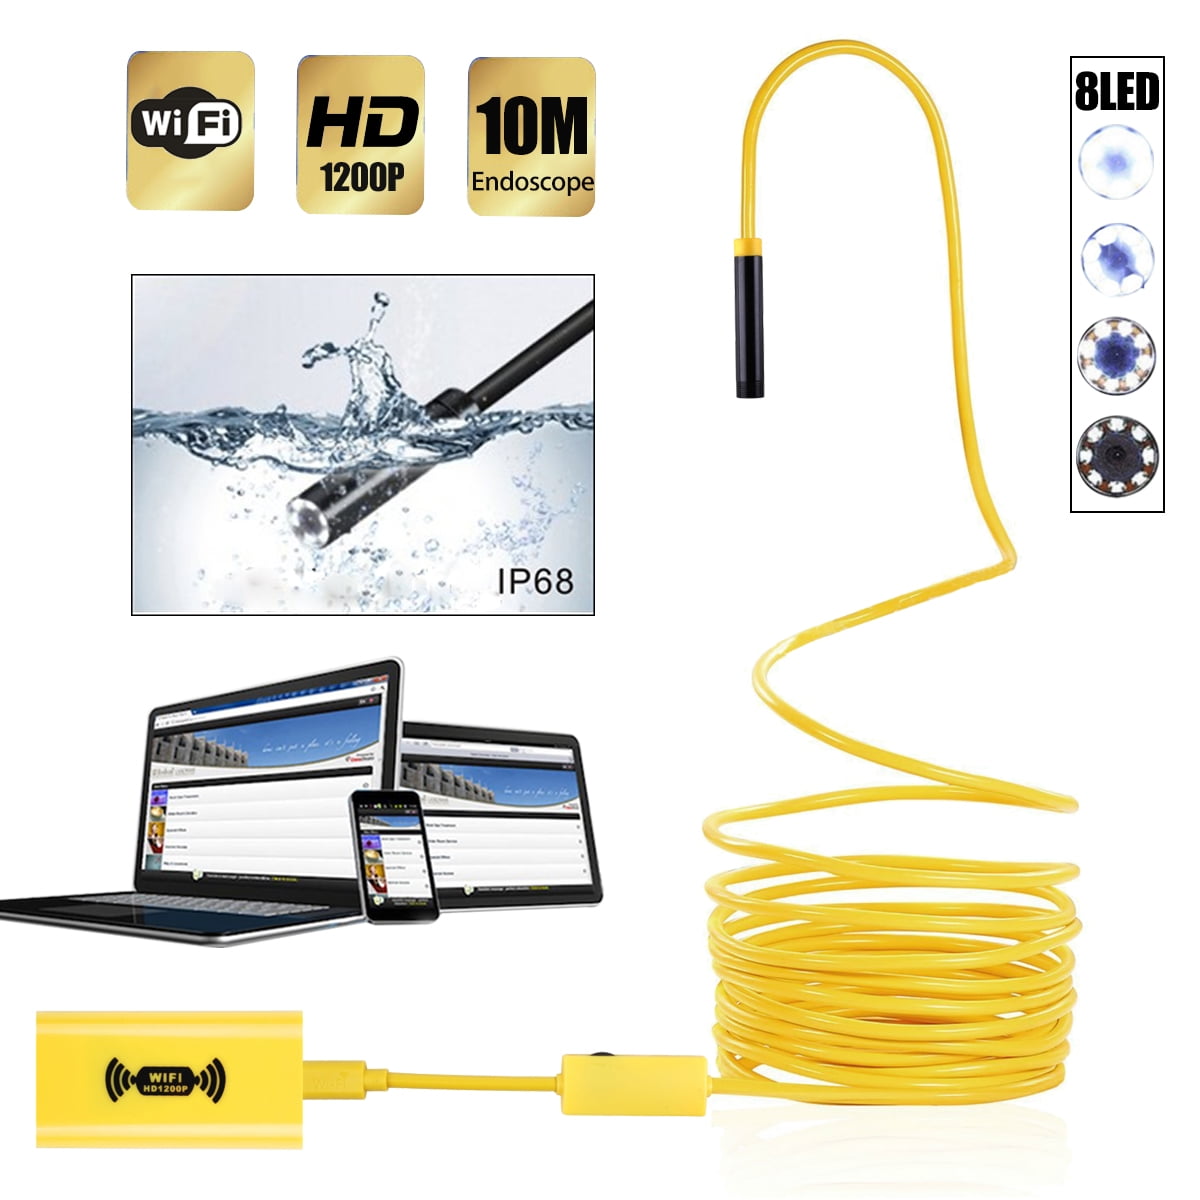 10M 8LED 1200P HD WiFi Endoscope Borescope Inspection Camera for iPhone Android 